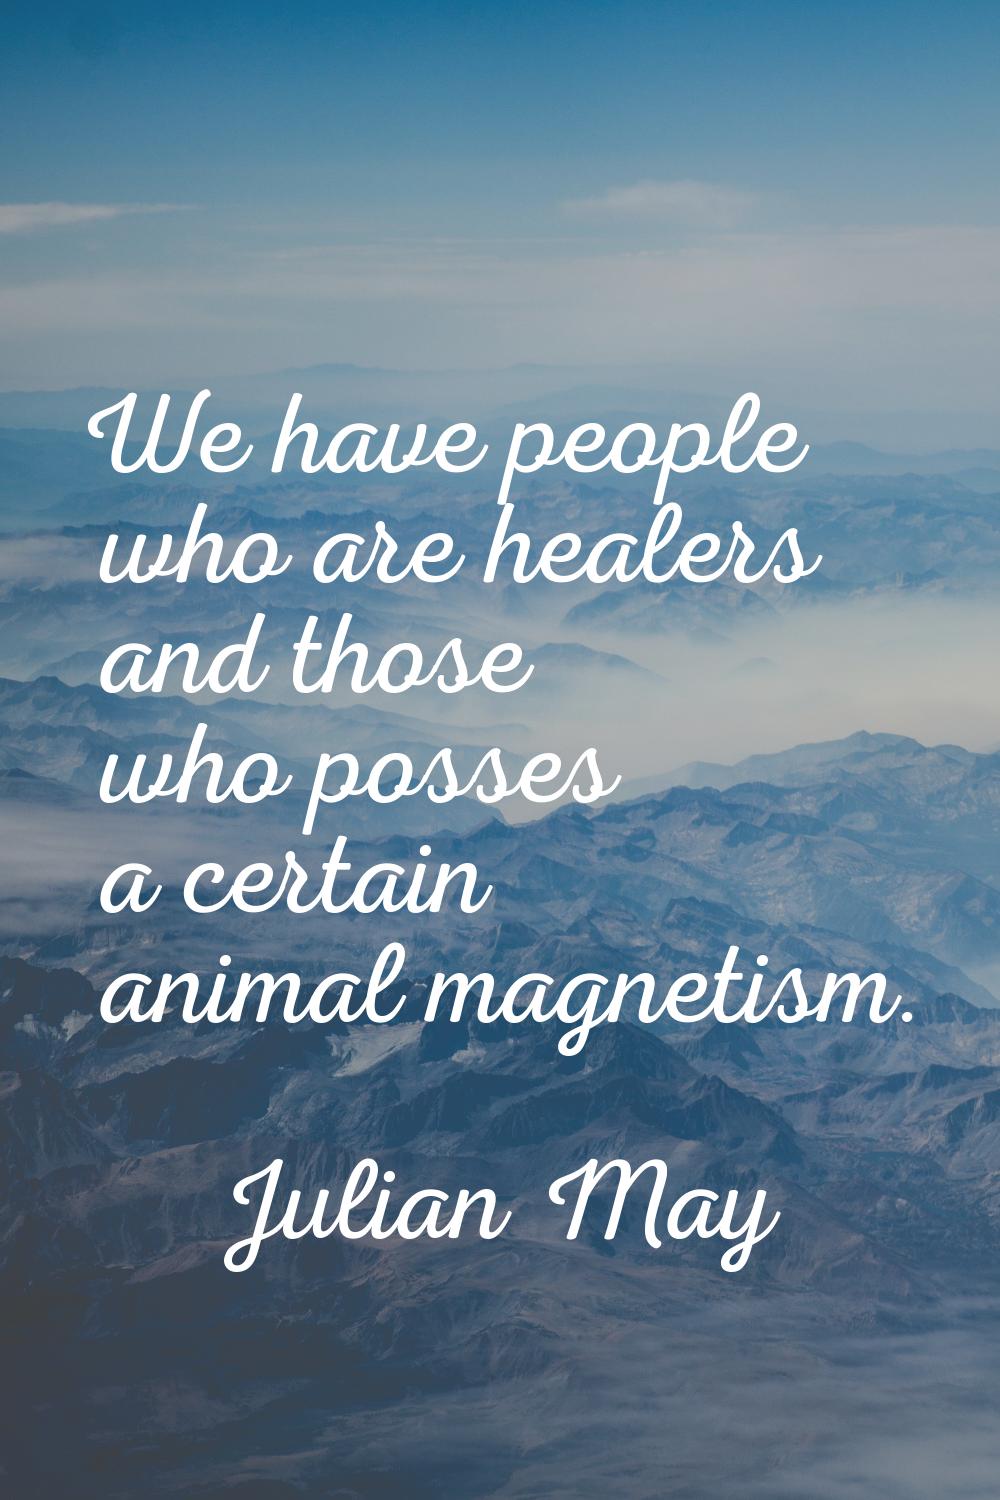 We have people who are healers and those who posses a certain animal magnetism.